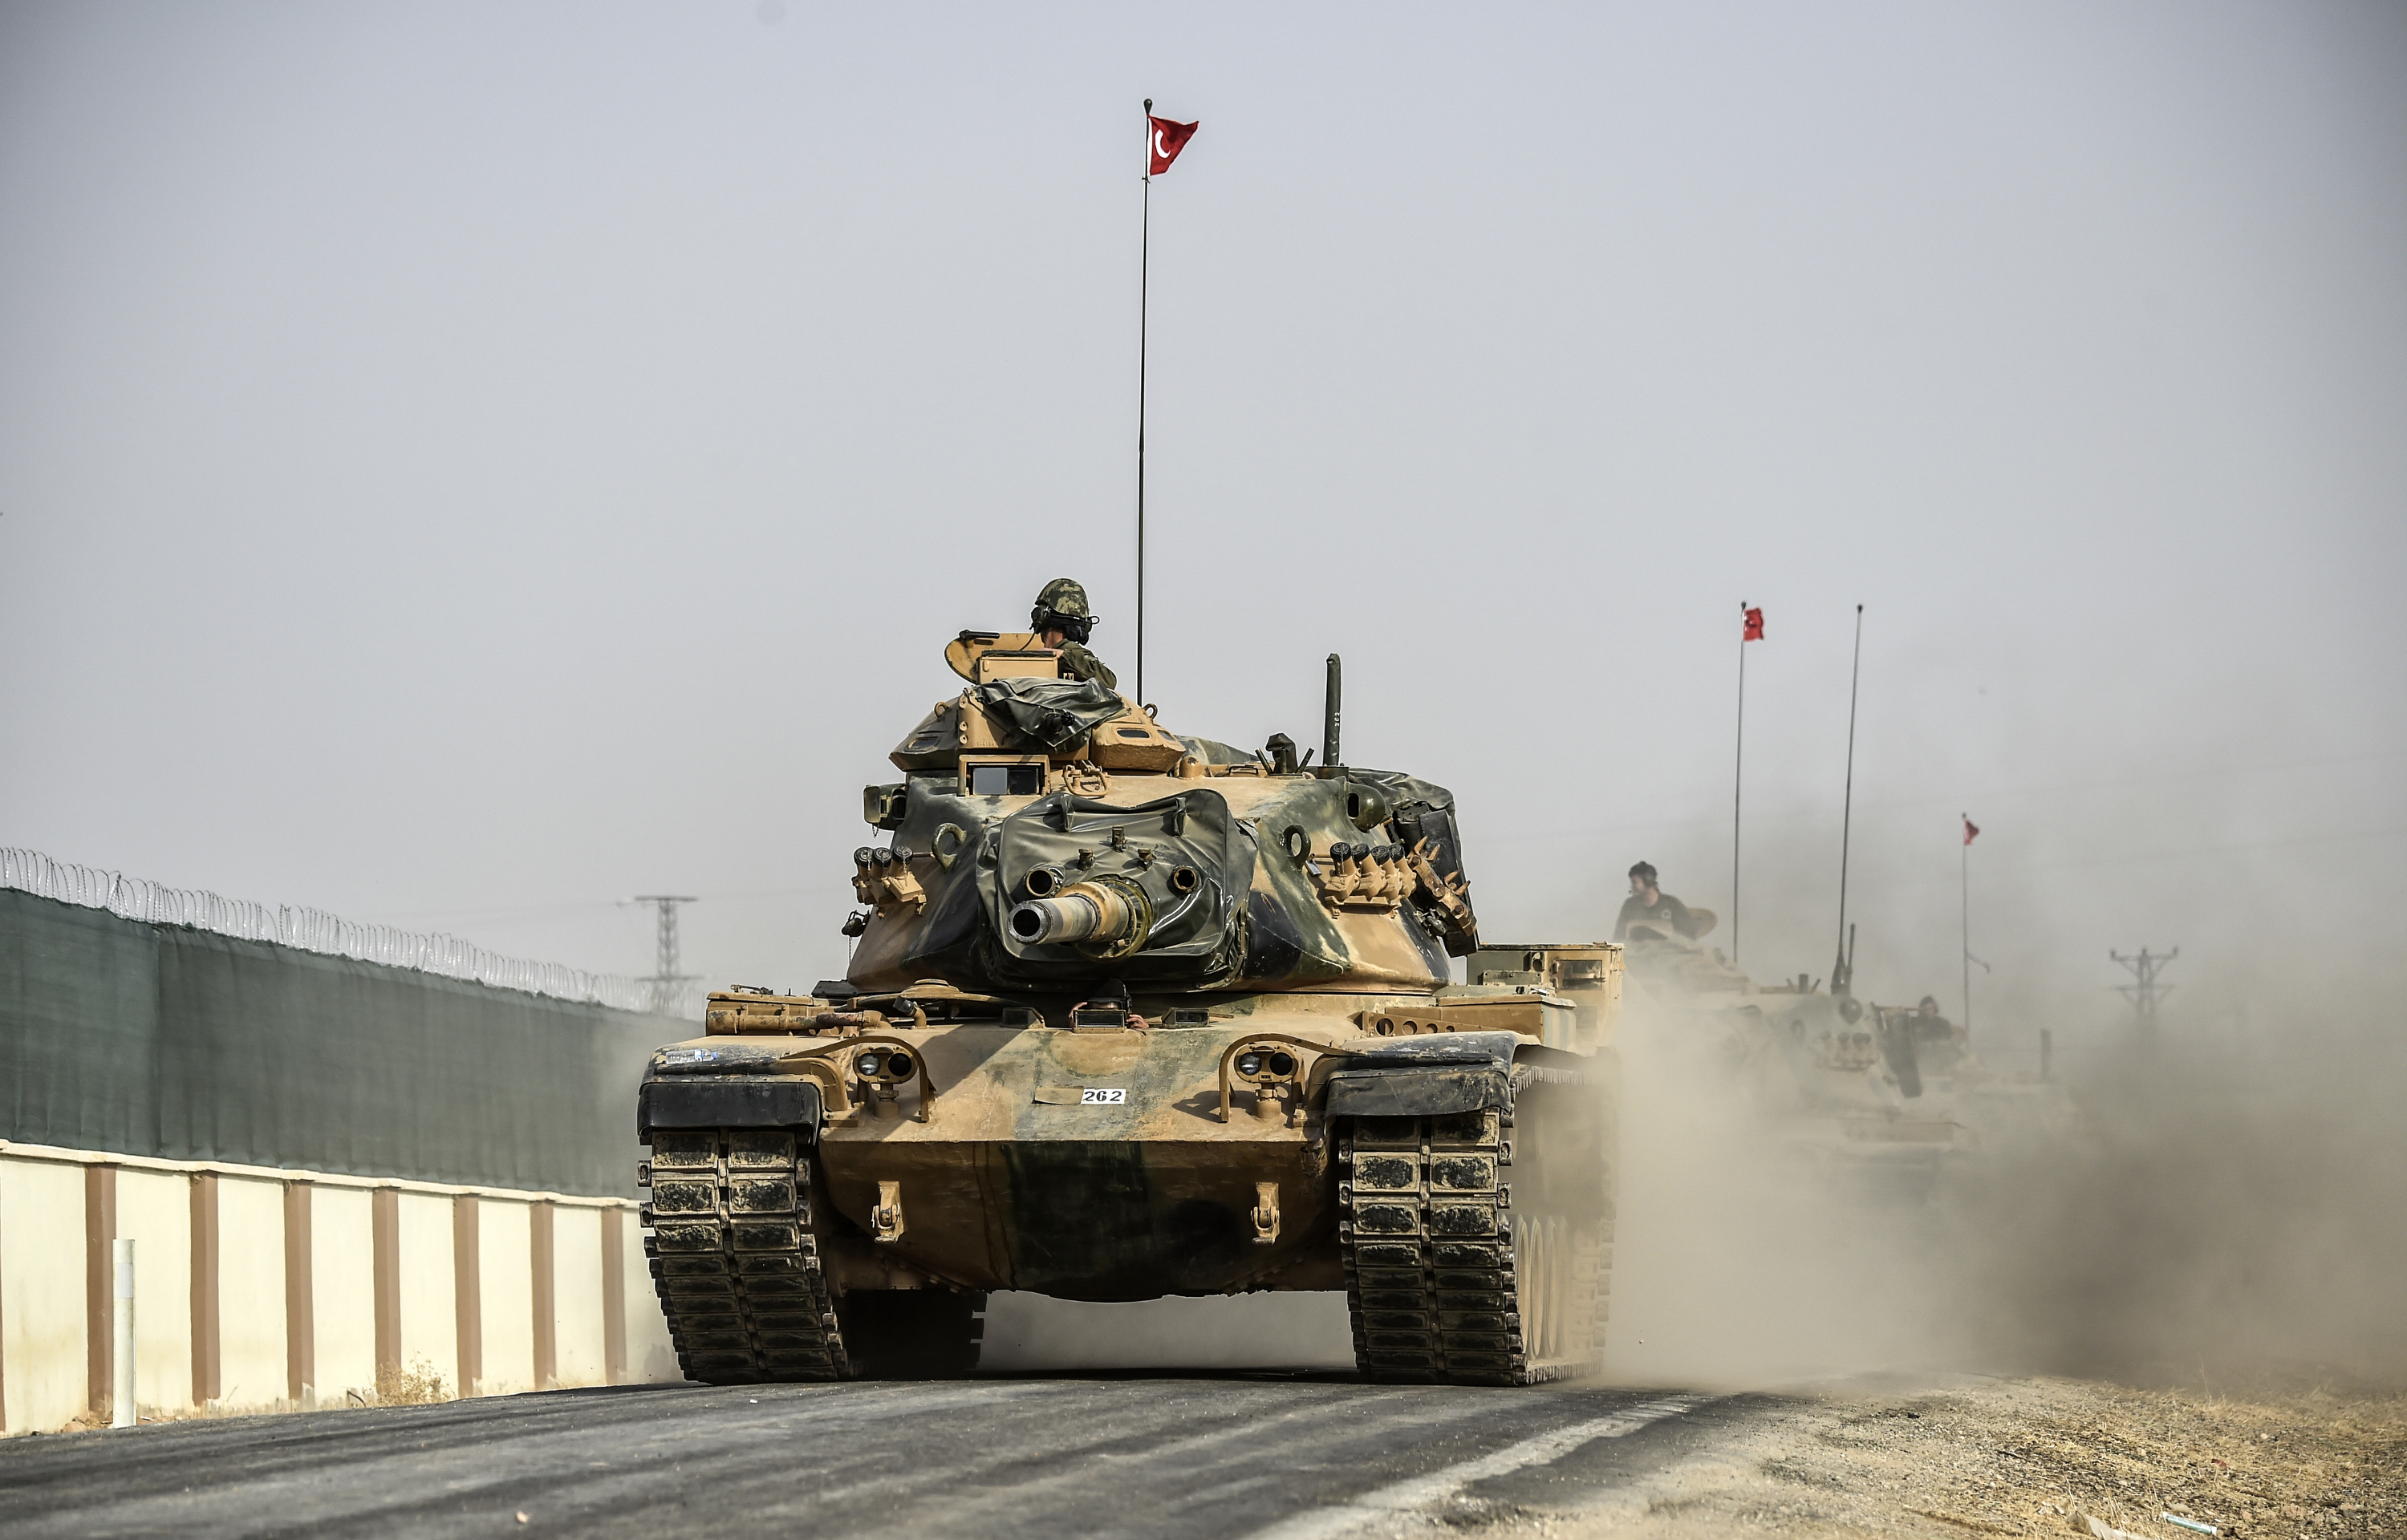 This picture taken around 5 kilometres west from the Turkish Syrian border city of Karkamis in the southern region of Gaziantep, on August 25, 2016 shows Turkish Army tanks driving to the Syrian Turkish border town of Jarabulus. Turkey's army backed by international coalition air strikes launched an operation involving fighter jets and elite ground troops to drive Islamic State jihadists out of a key Syrian border town. The air and ground operation, the most ambitious launched by Turkey in the Syria conflict, is aimed at clearing jihadists from the town of Jarabulus, which lies directly opposite the Turkish town of Karkamis. / AFP PHOTO / BULENT KILIC